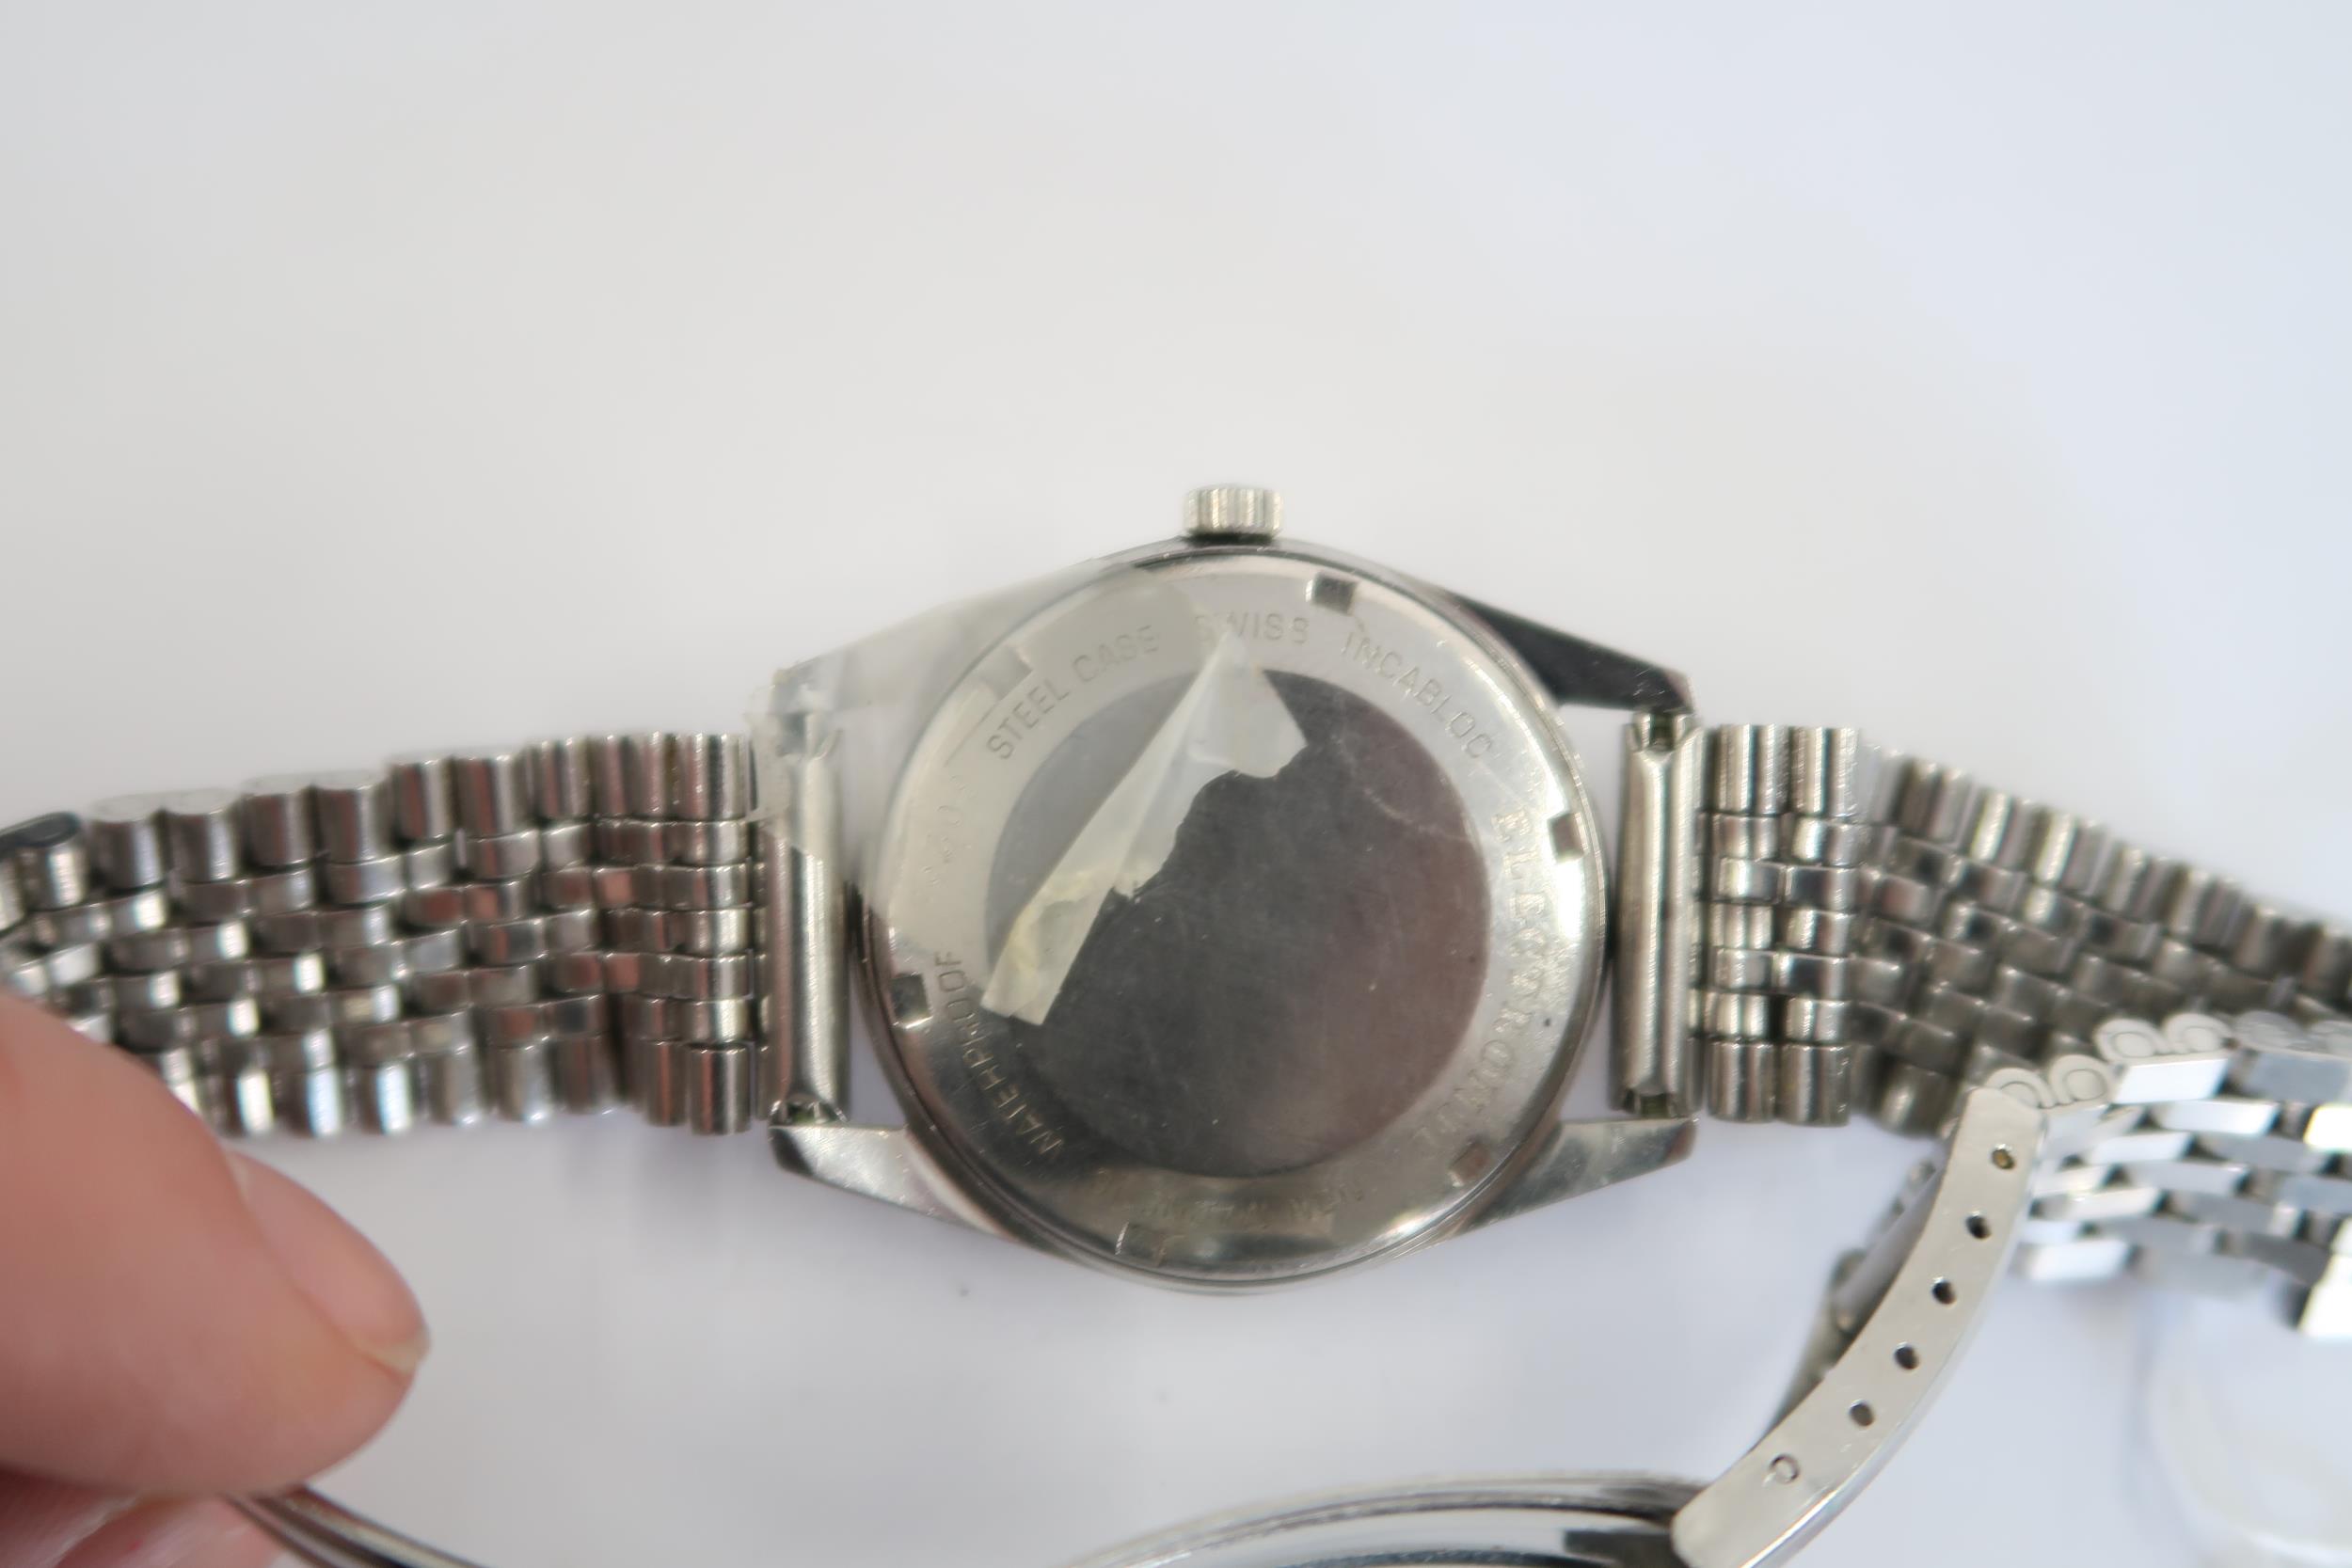 A Gents Rotary electric watch with date on a stainless steel bracelet, running in saleroom - Image 3 of 3